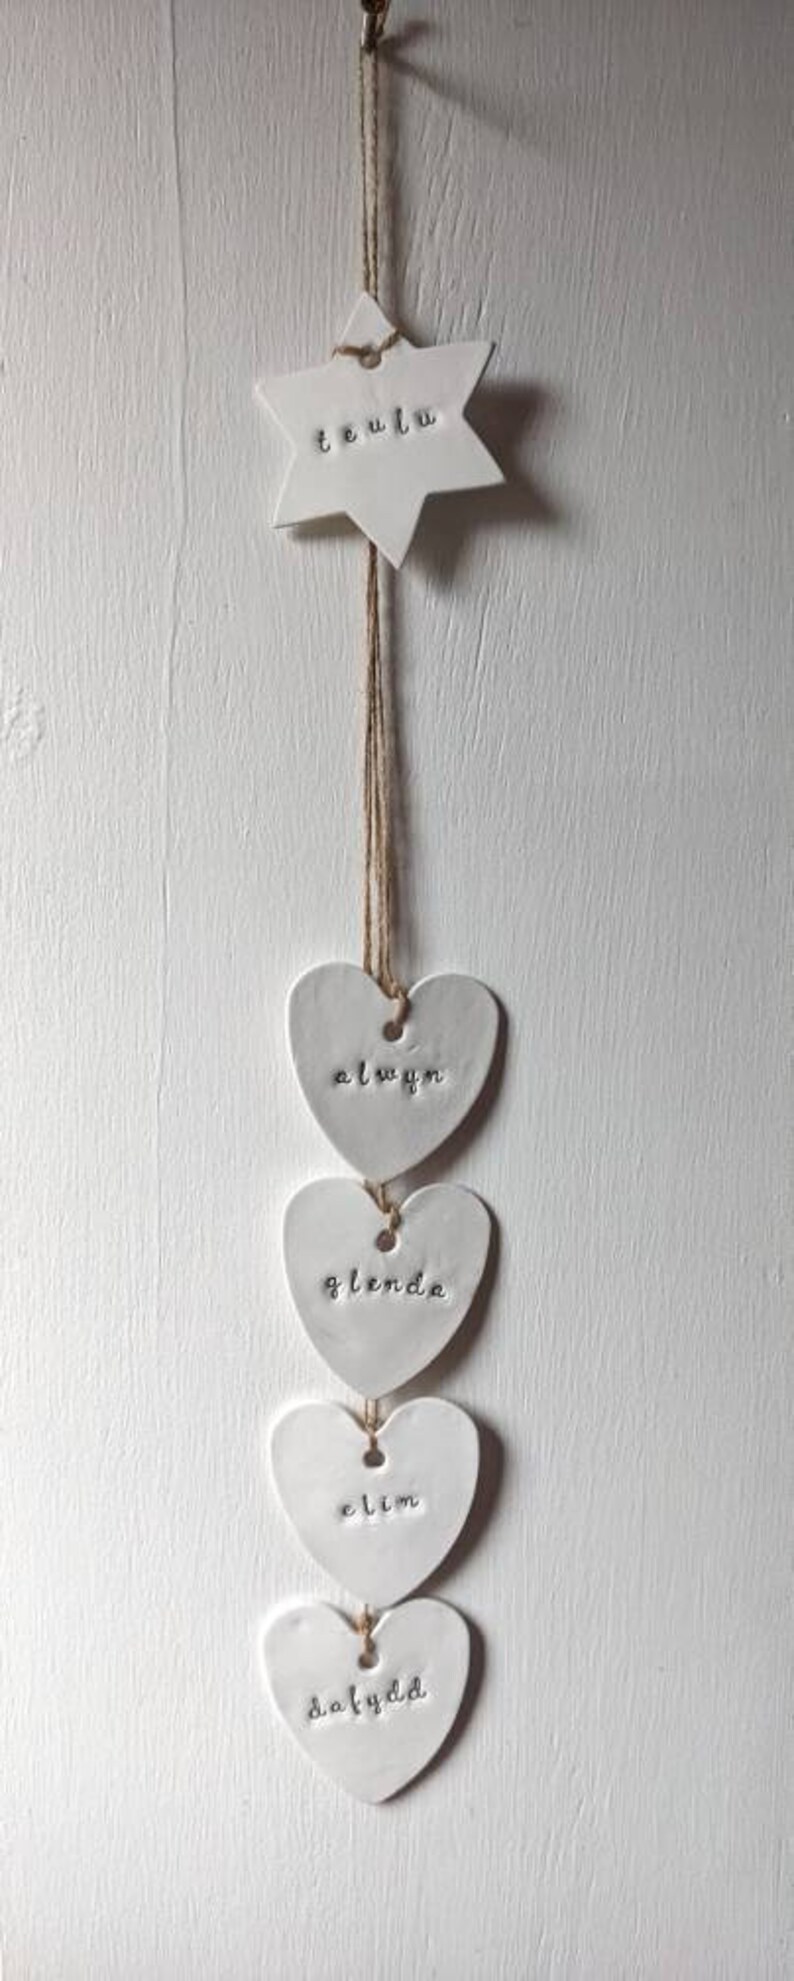 PERSONALISED FAMILY chain hanging ornament plaque, unique GIFT, home decor, rustic, shabby chic, family Christmas present. image 2